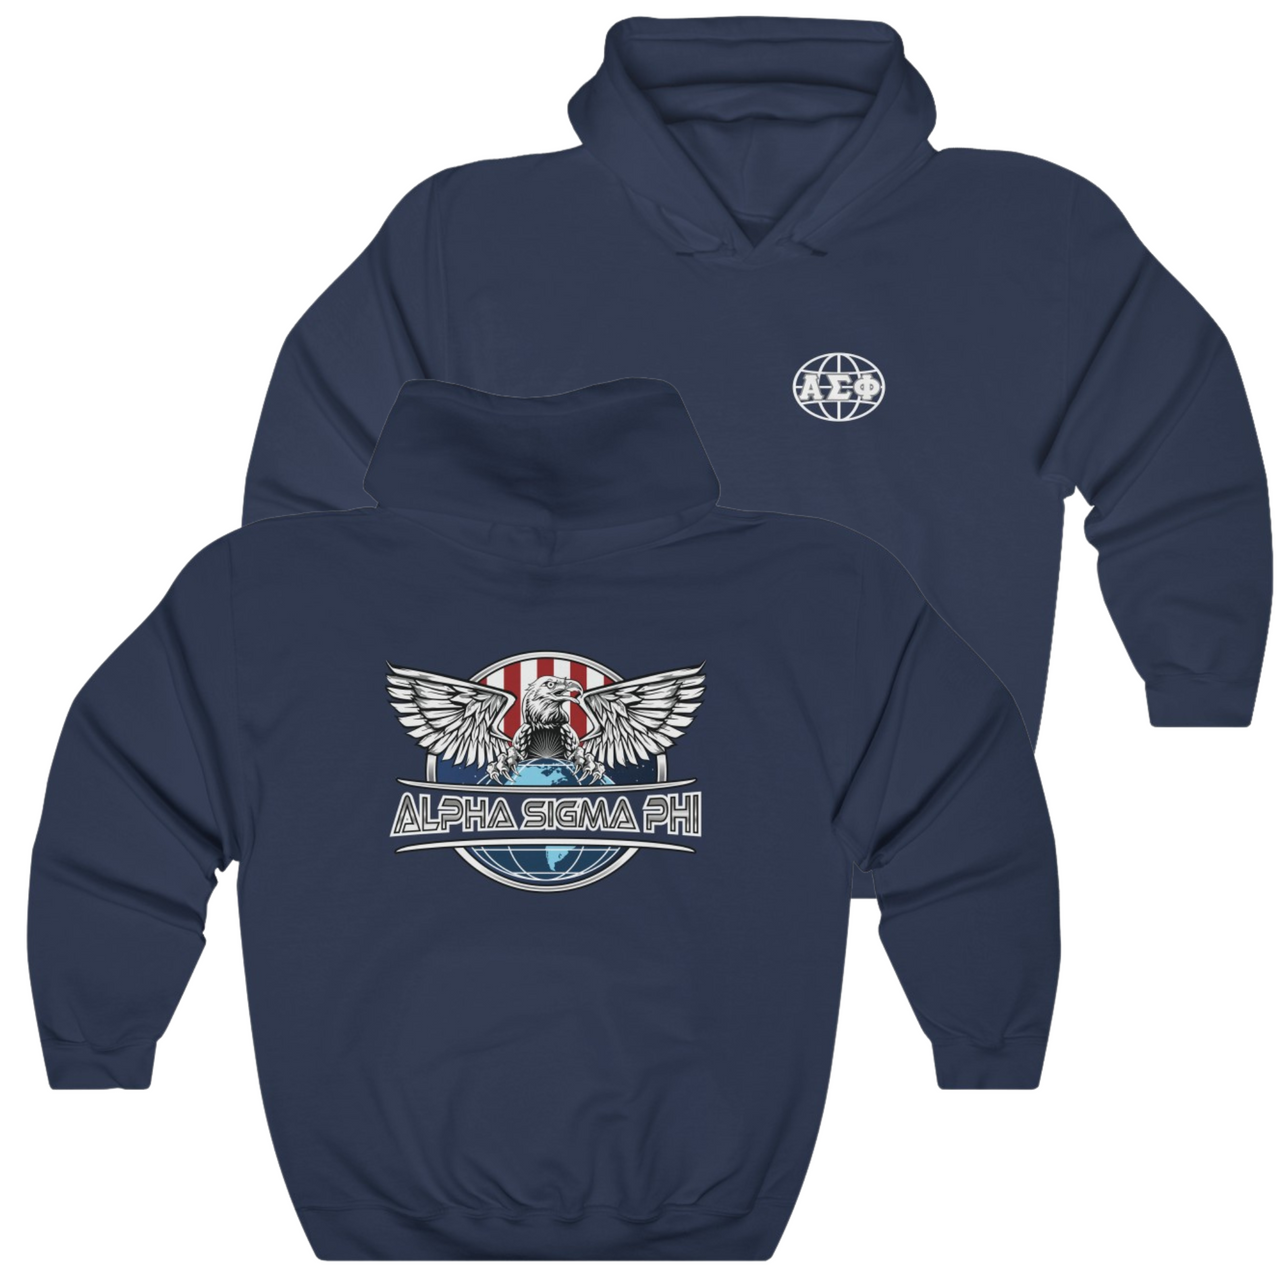 Navy Alpha Sigma Phi Graphic Hoodie | The Fraternal Order | Alpha Sigma Phi Fraternity Clothes 